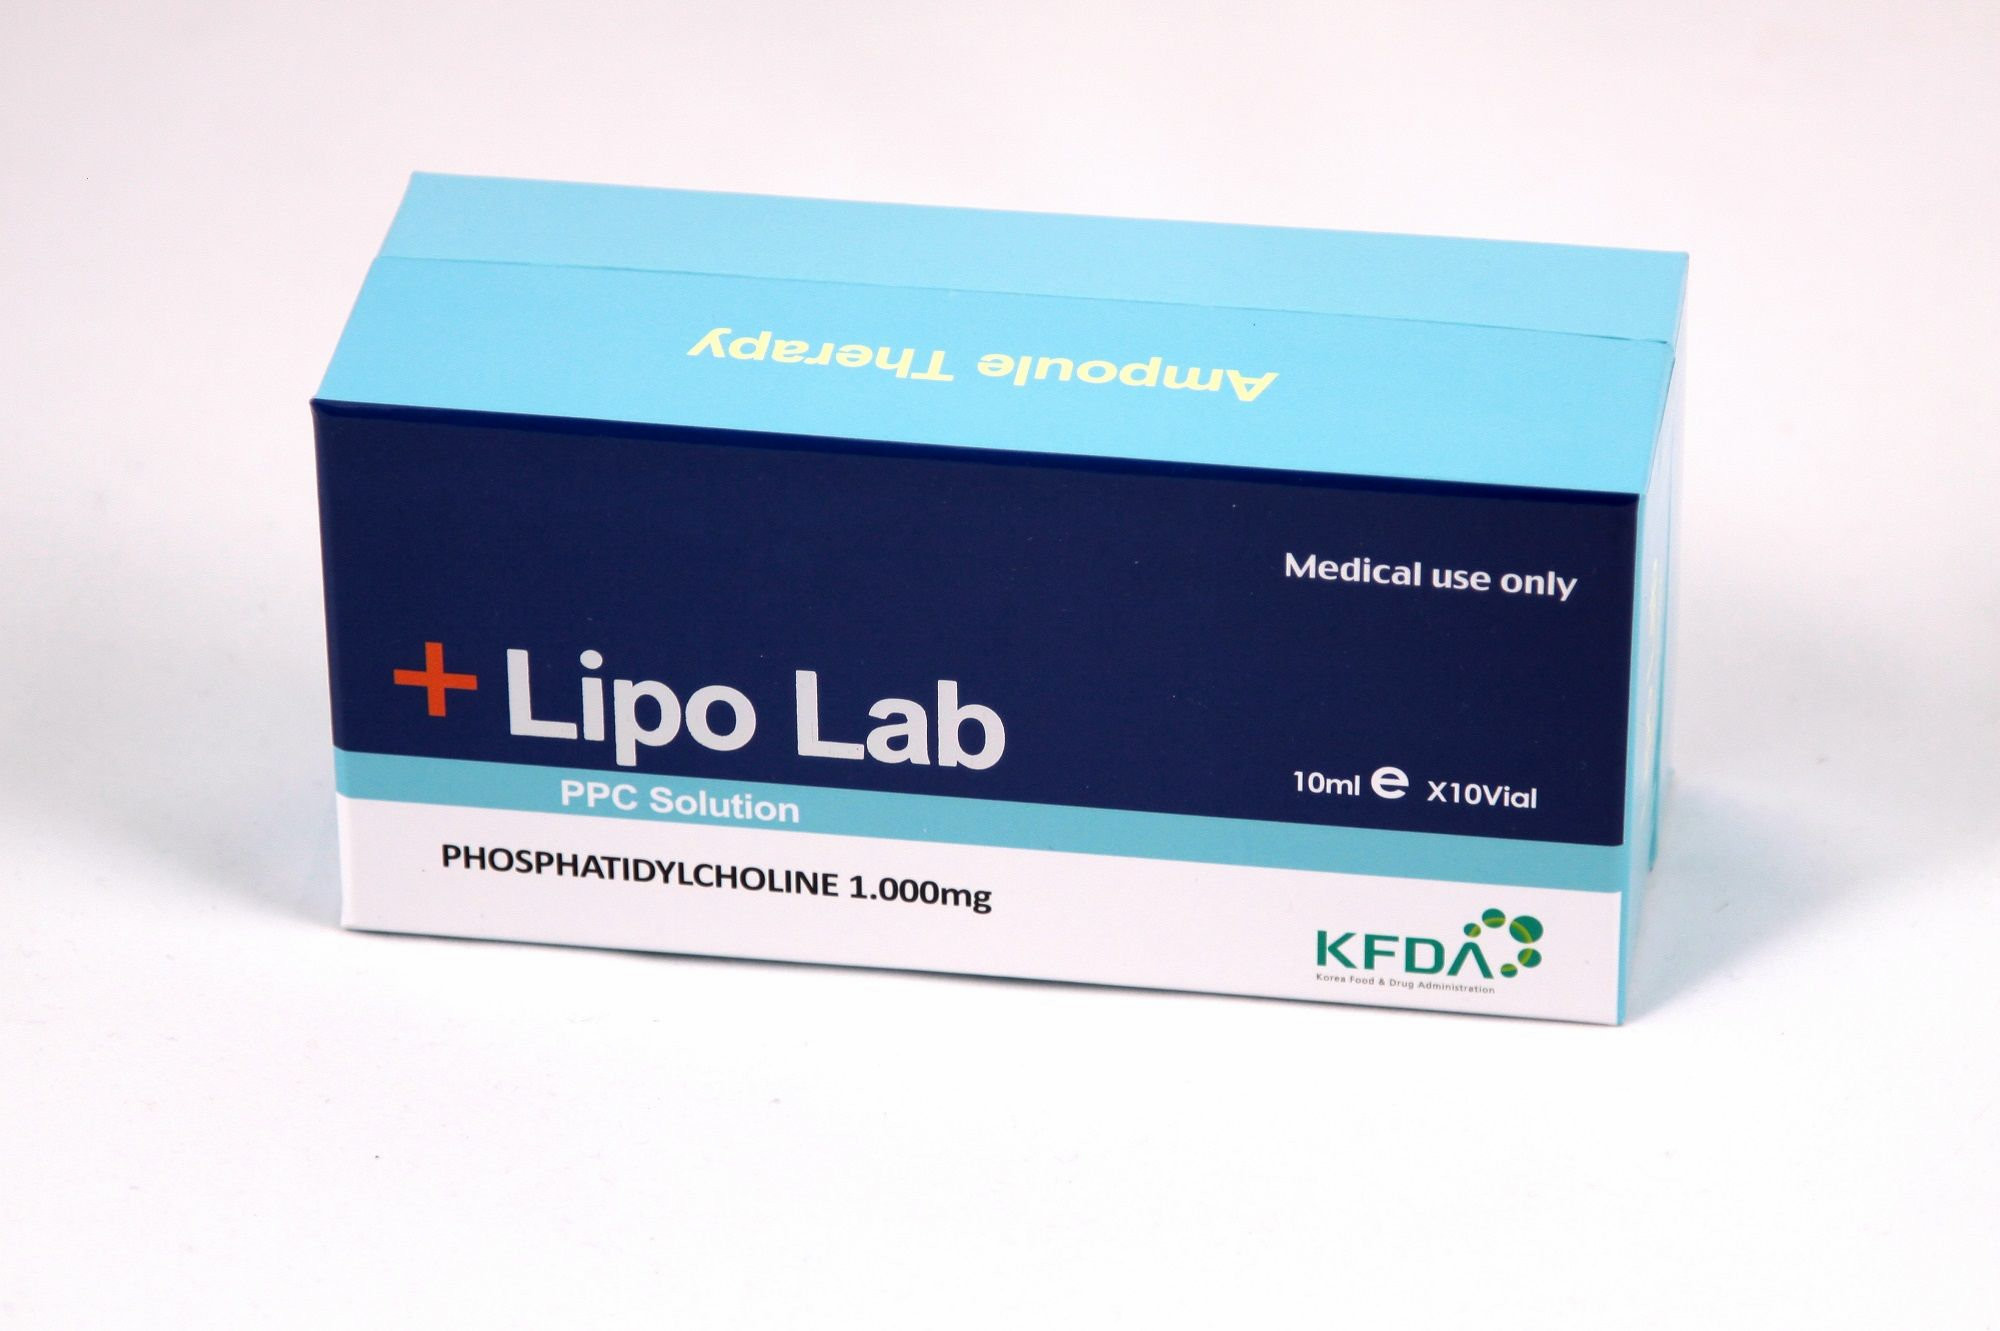  Lipo lab ppc slimming solution fat dissolving lipo lab injection V line lipolysis injection lipo lab Manufactures